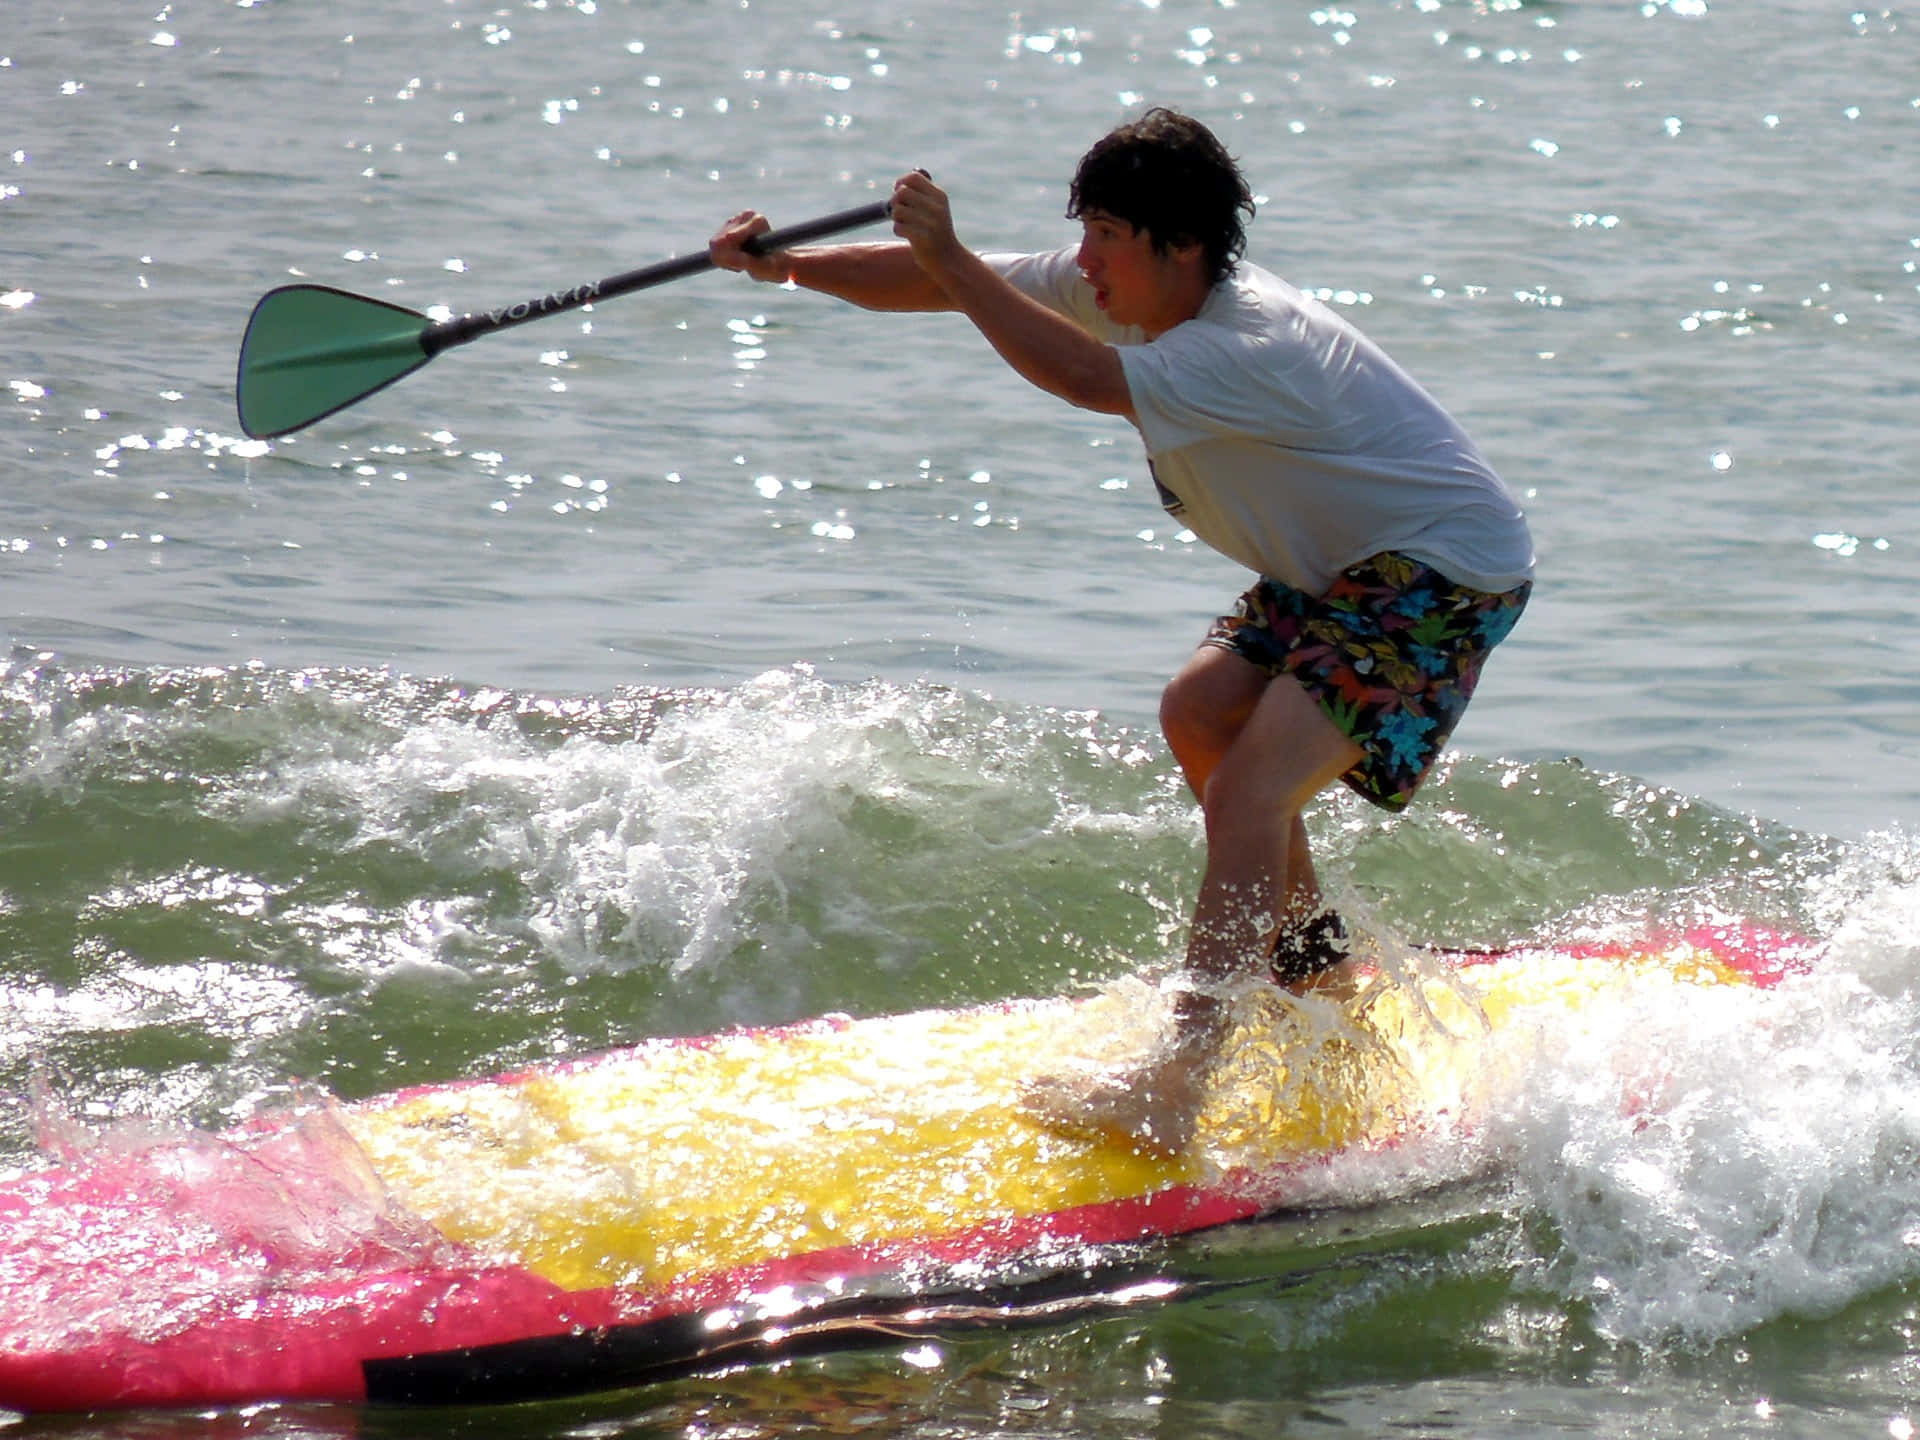 Exciting Beach Water Sports Adventure Wallpaper